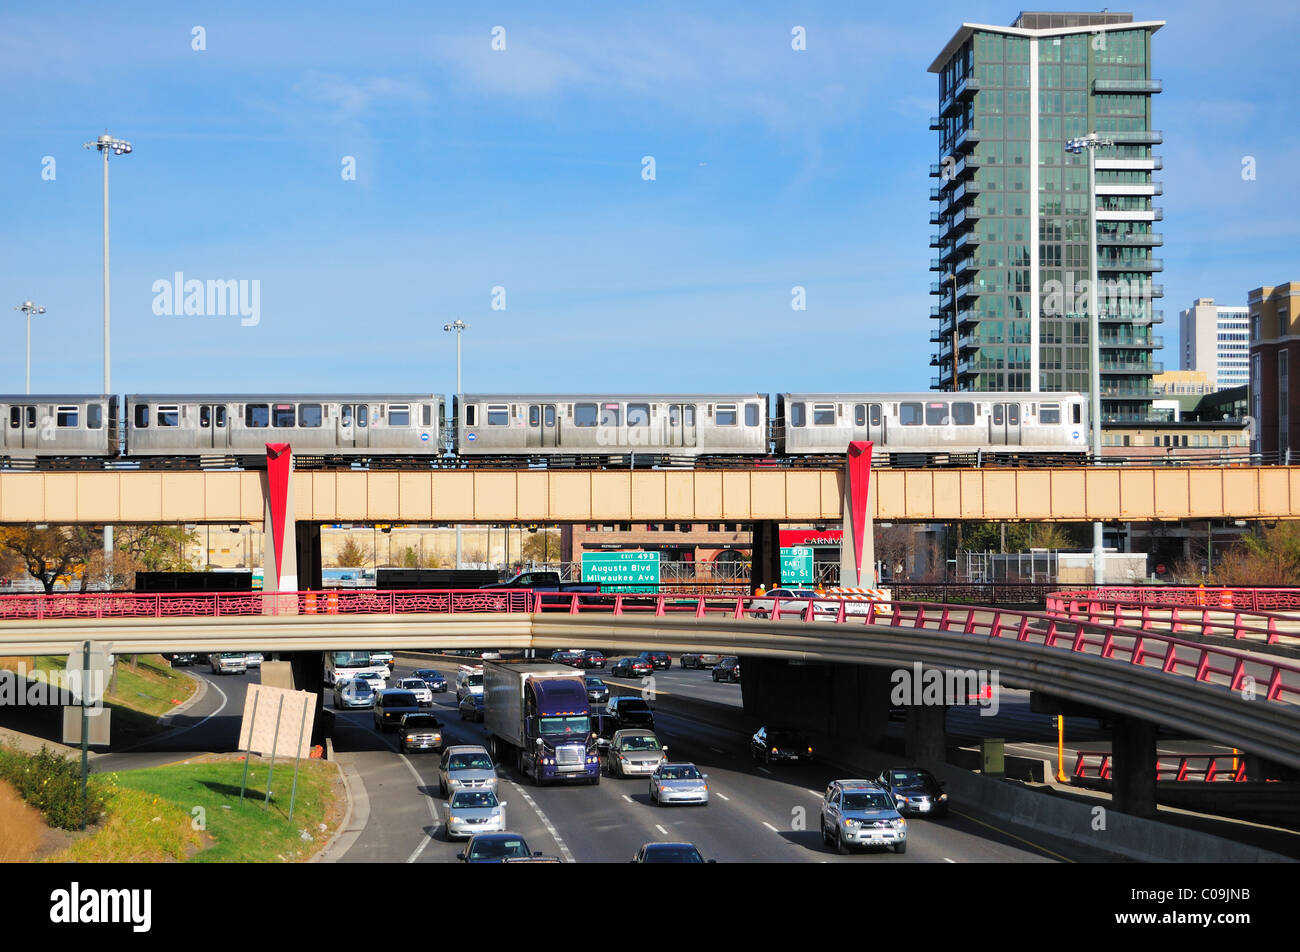 A CTA (Chicago Transit Authority) rapid transit Pink Line train above the traffic of the Kennedy Expressway Chicago Illinois, USA. Stock Photo